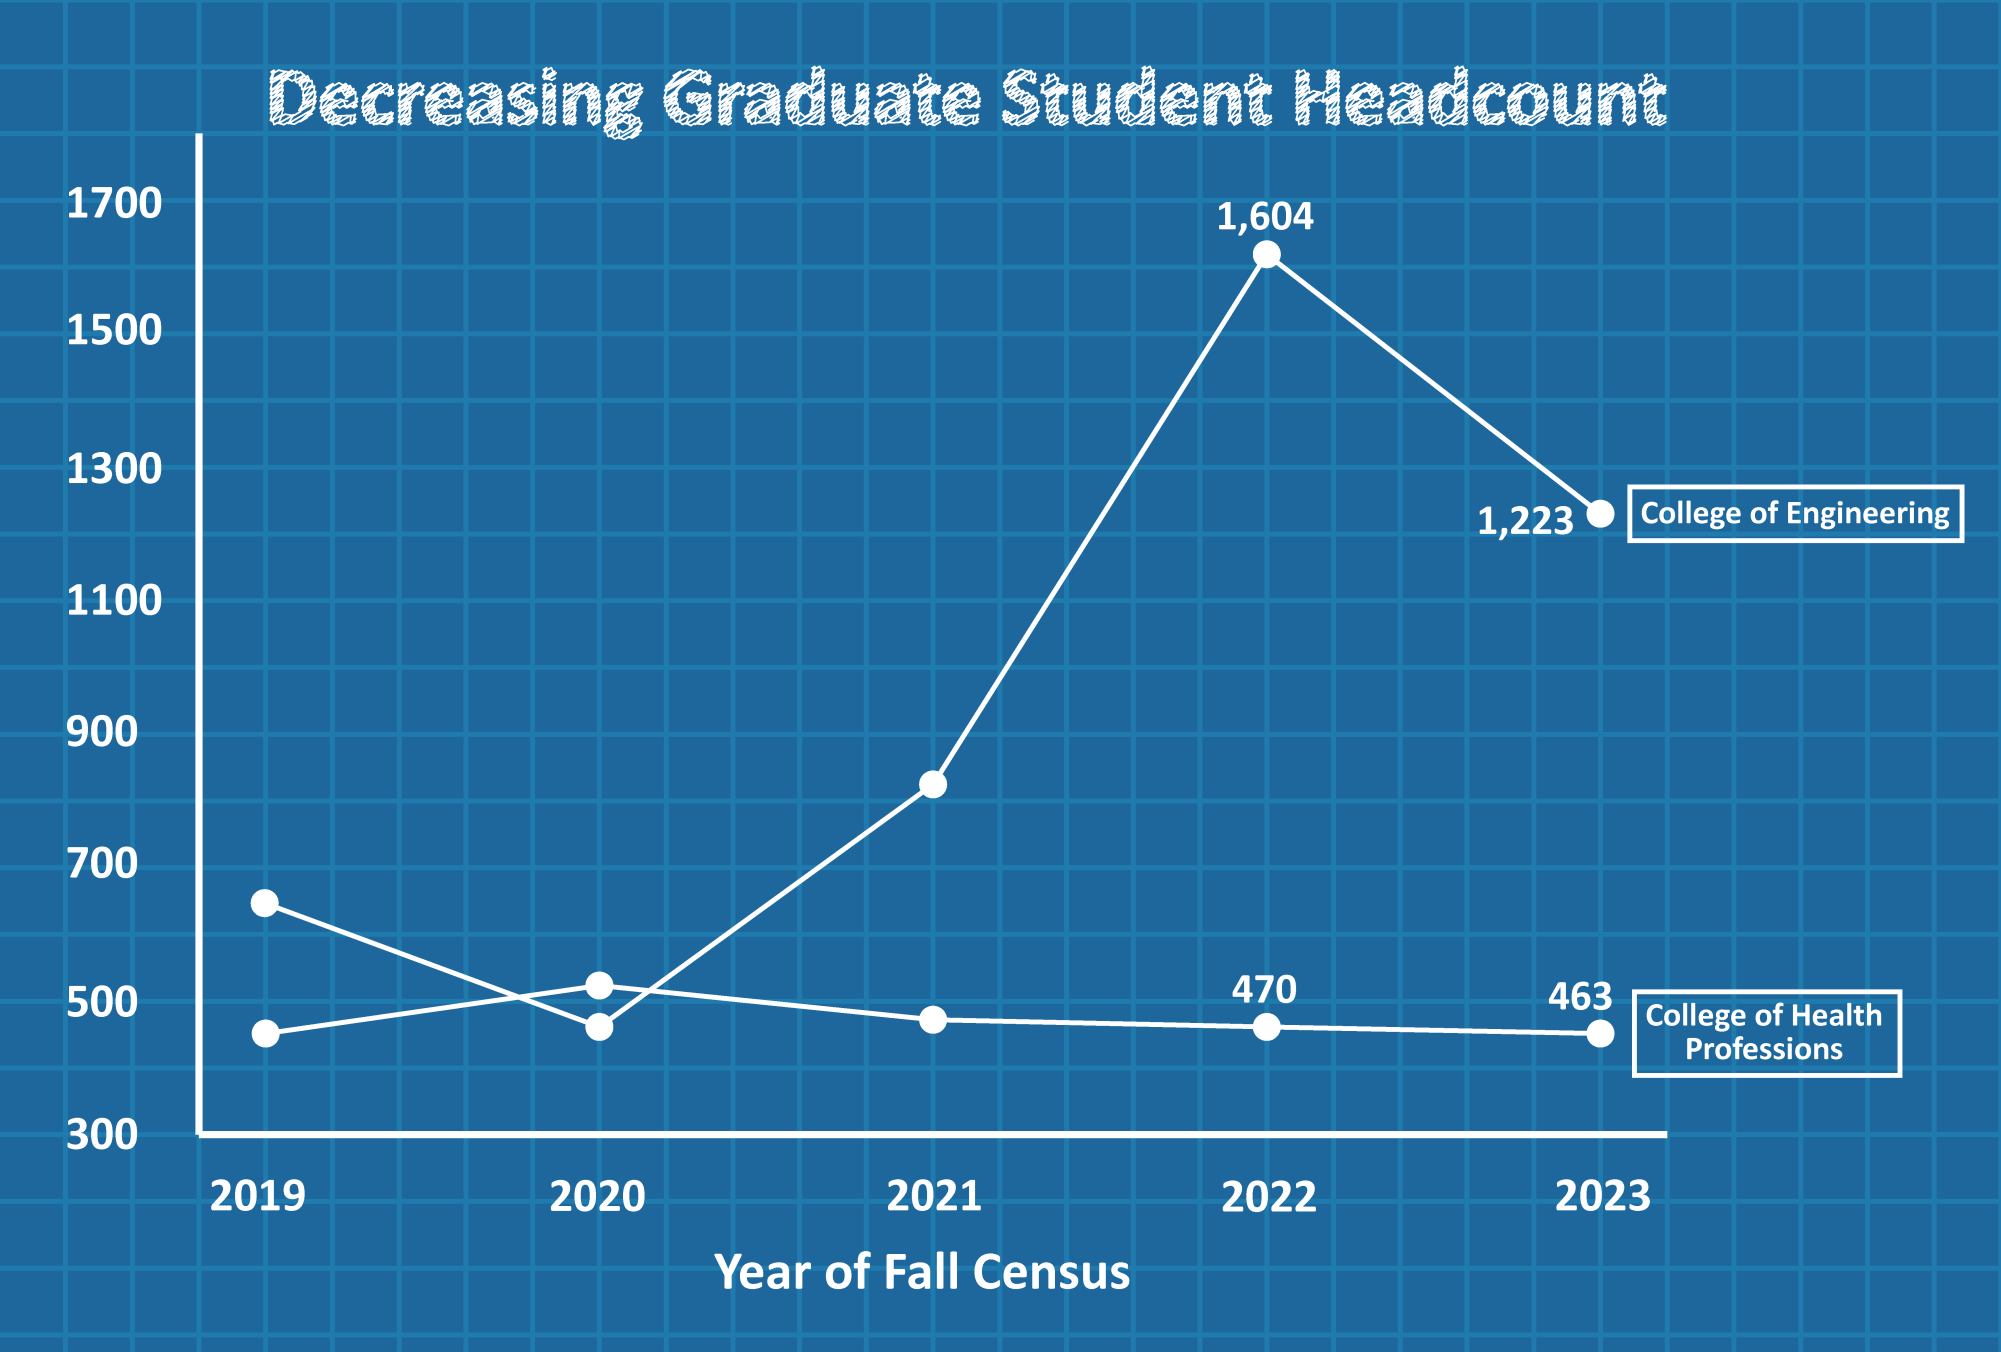 Decreasing graduate student headcount in the College of Engineering and the College of Health Professions.